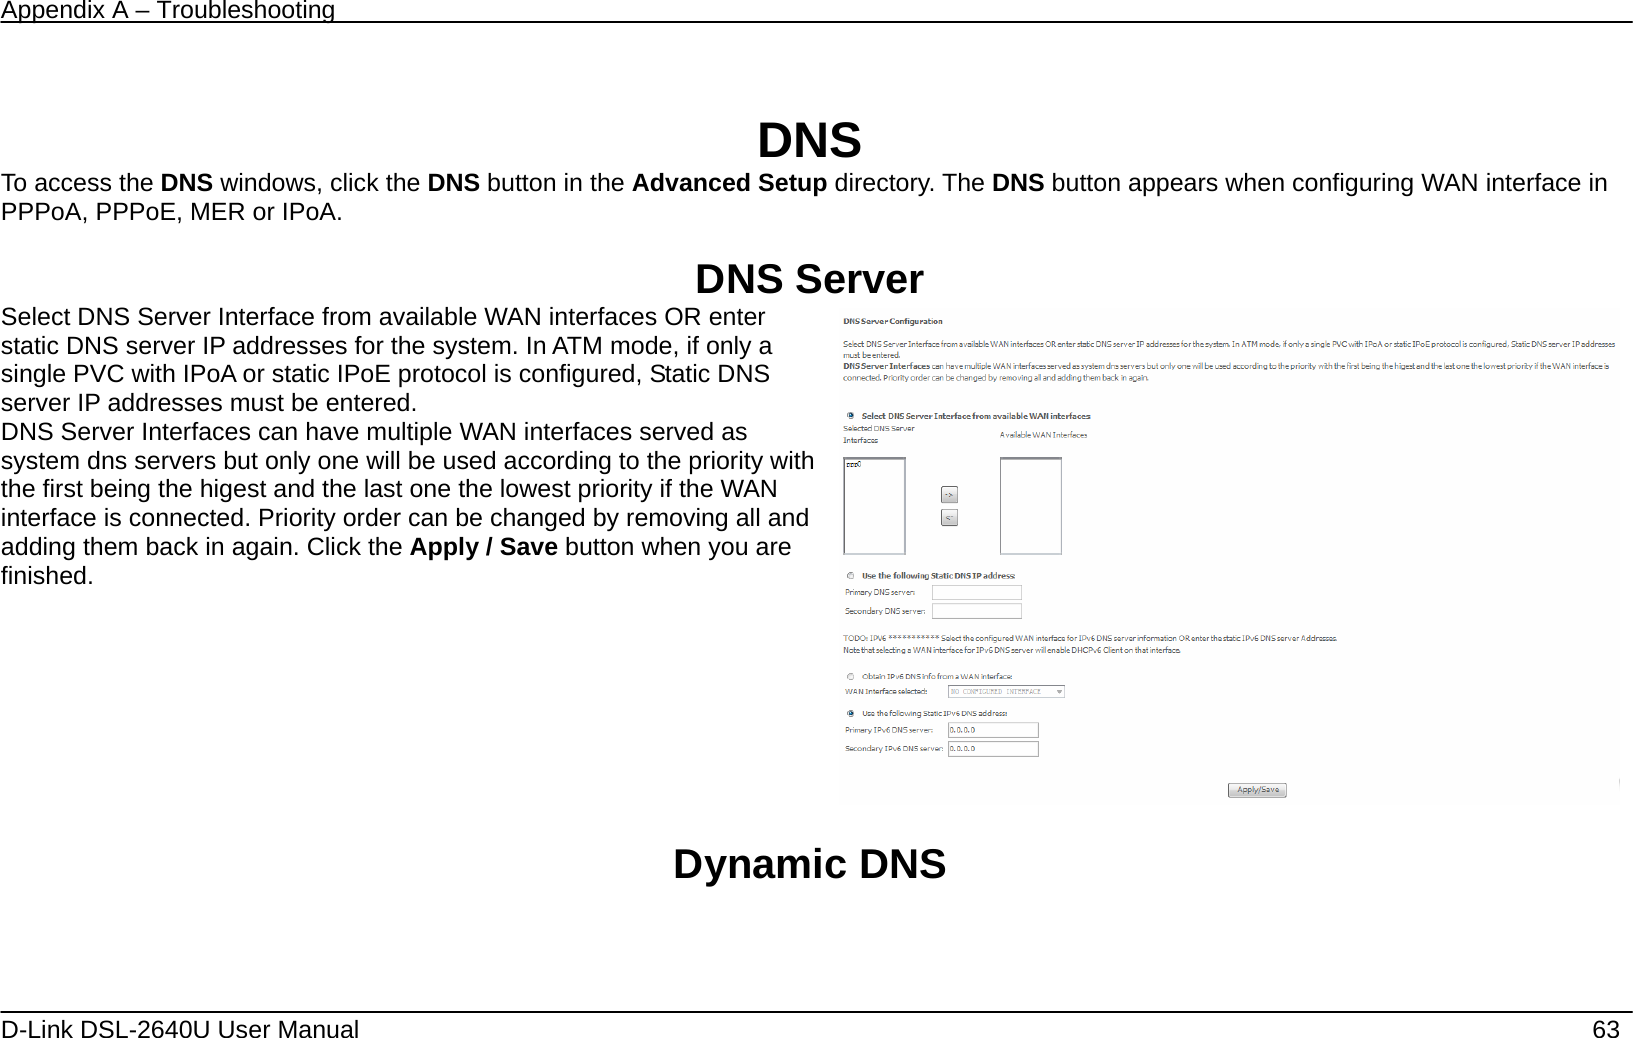 Appendix A – Troubleshooting   D-Link DSL-2640U User Manual    63  DNS To access the DNS windows, click the DNS button in the Advanced Setup directory. The DNS button appears when configuring WAN interface in PPPoA, PPPoE, MER or IPoA.  DNS Server Select DNS Server Interface from available WAN interfaces OR enter static DNS server IP addresses for the system. In ATM mode, if only a single PVC with IPoA or static IPoE protocol is configured, Static DNS server IP addresses must be entered. DNS Server Interfaces can have multiple WAN interfaces served as system dns servers but only one will be used according to the priority with the first being the higest and the last one the lowest priority if the WAN interface is connected. Priority order can be changed by removing all and adding them back in again. Click the Apply / Save button when you are finished.     Dynamic DNS 